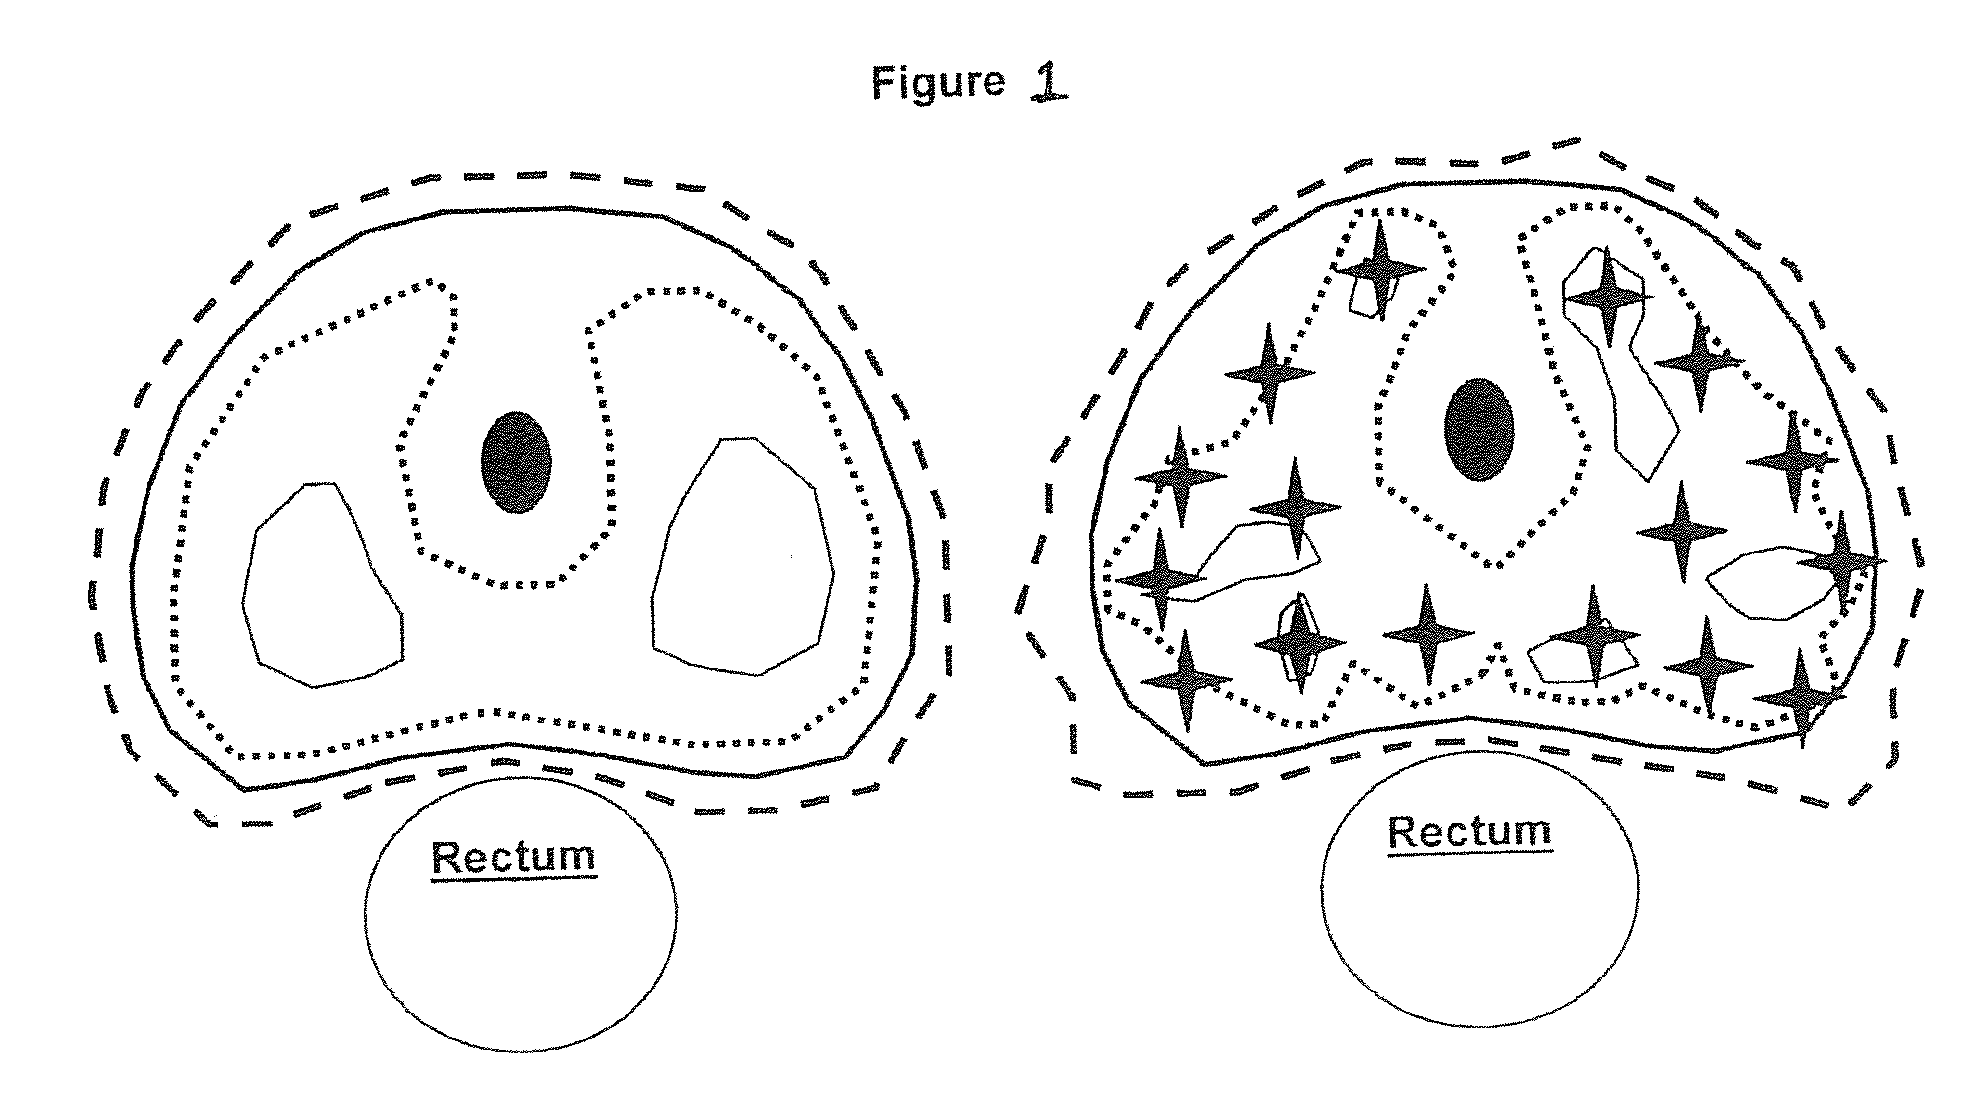 Methods for performing radiosurgery using non-homogeneous stereotactic techniques